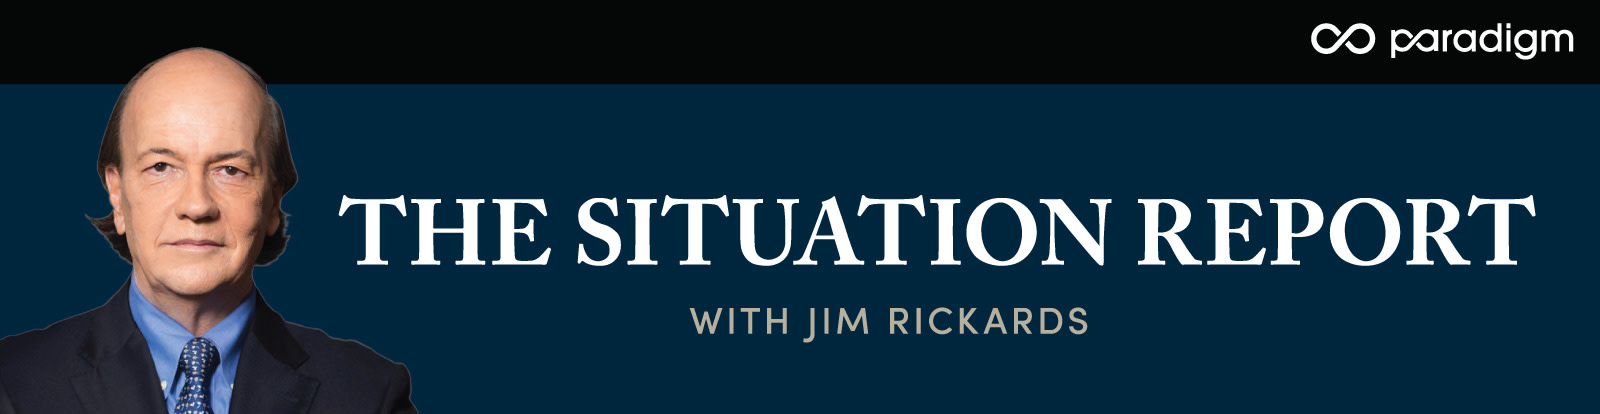 The Situation Report with Jim Rickards